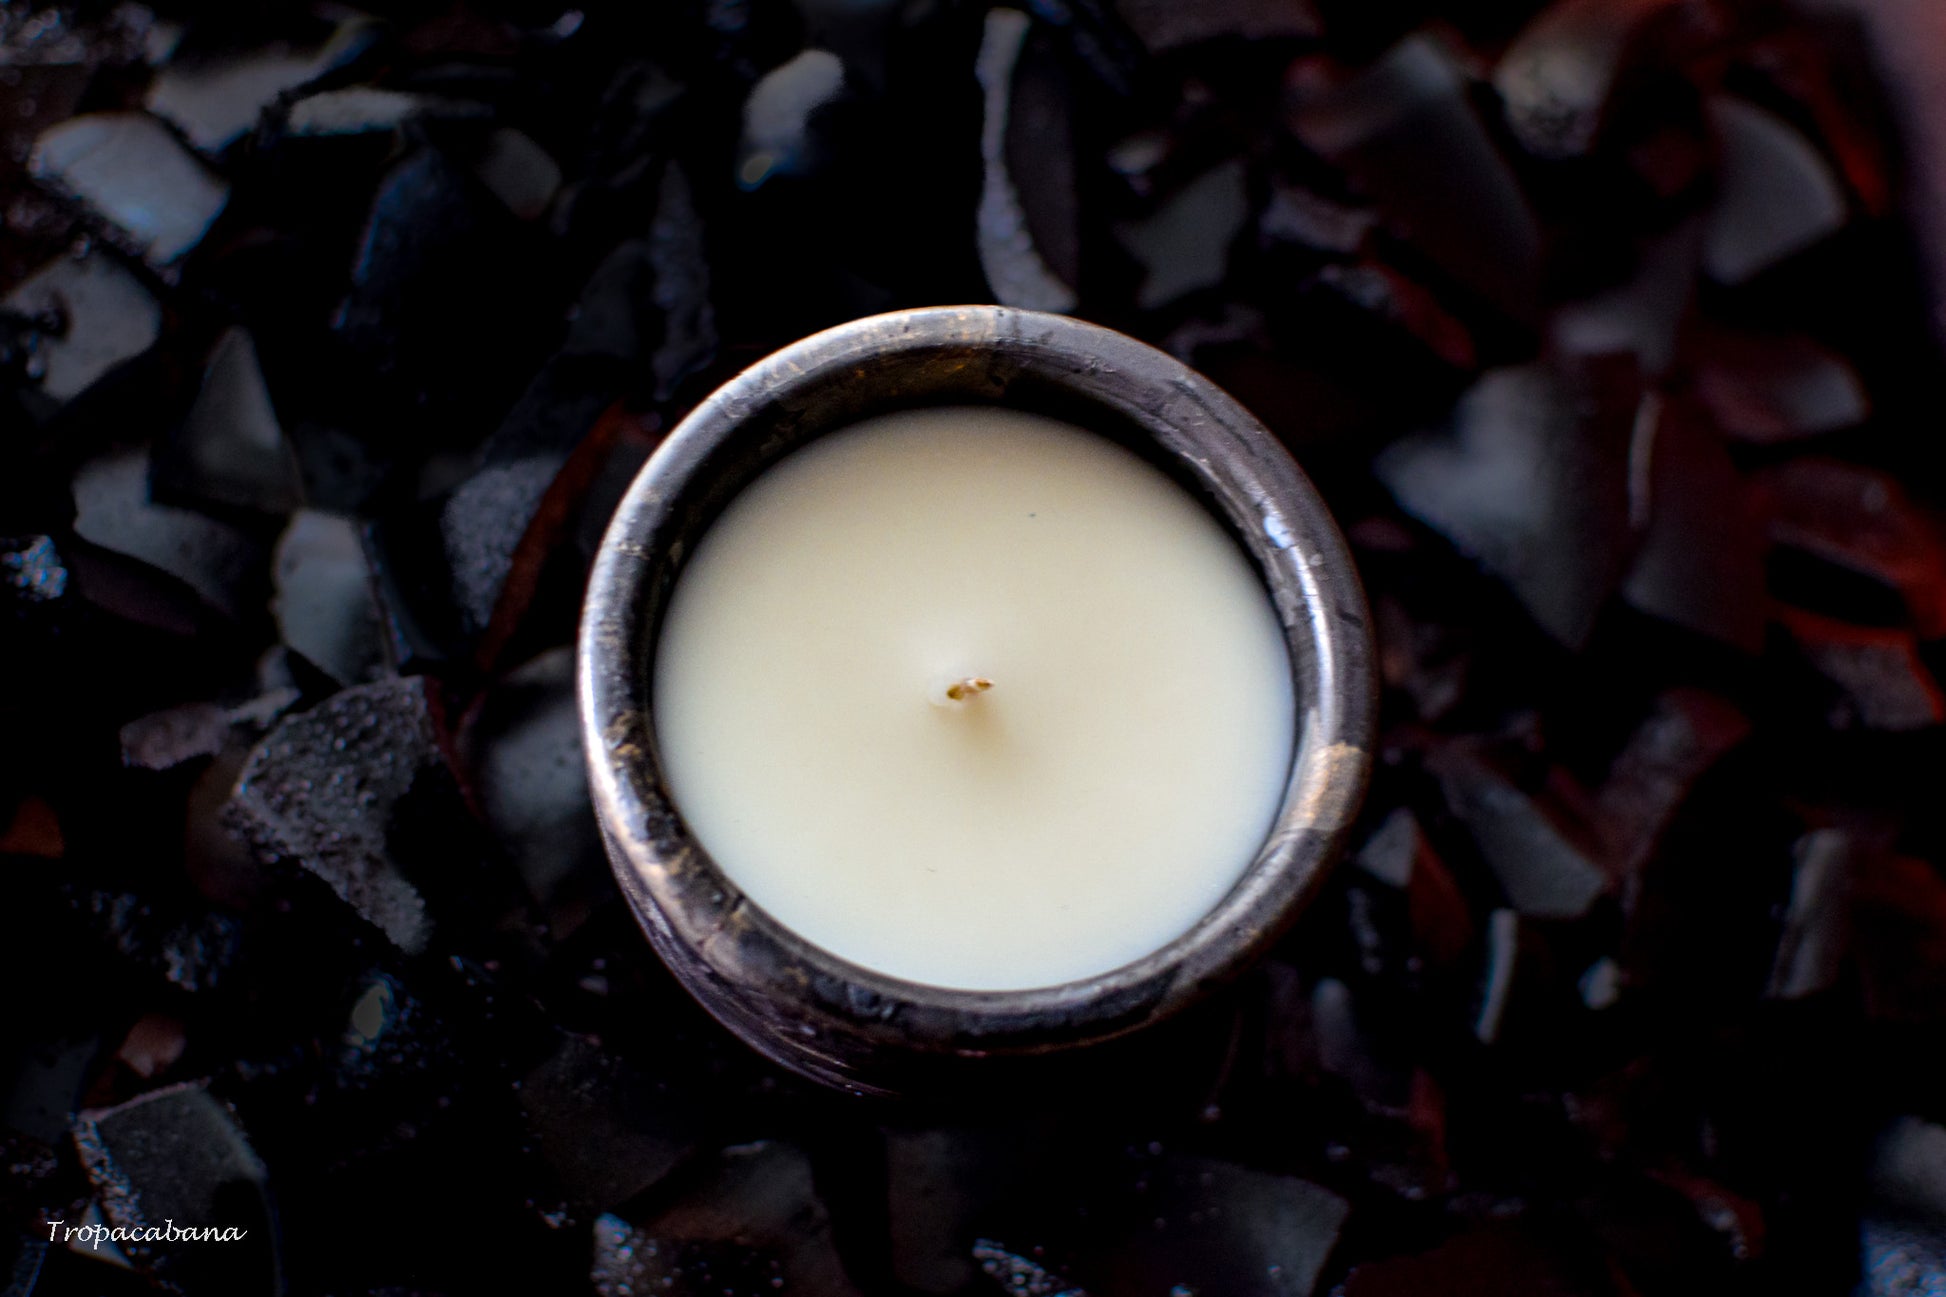 8 oz Handmade Concrete Obsidian Candle, in black and golden tones, luxuy candle, vegan candle, inspired by the kilauea volcano in the big island of hawaii, fragrance is floral, smoky and fruity,Handpoured with coconut wax,